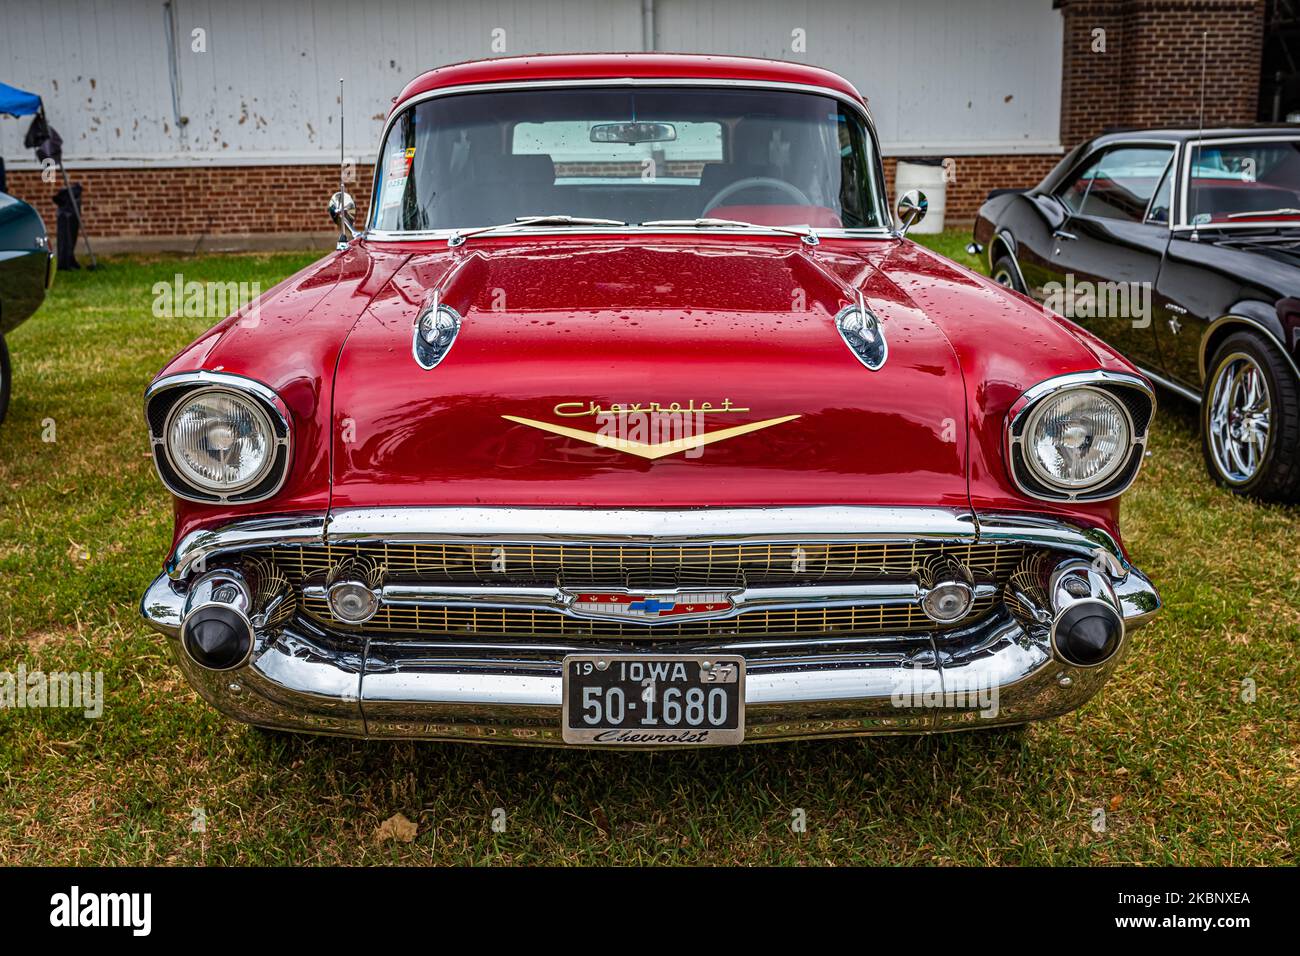 Des Moines, IA - July 01, 2022: High perspective front view of a 1957 Chevrolet BelAir Sedan Delivery at a local car show. Stock Photo